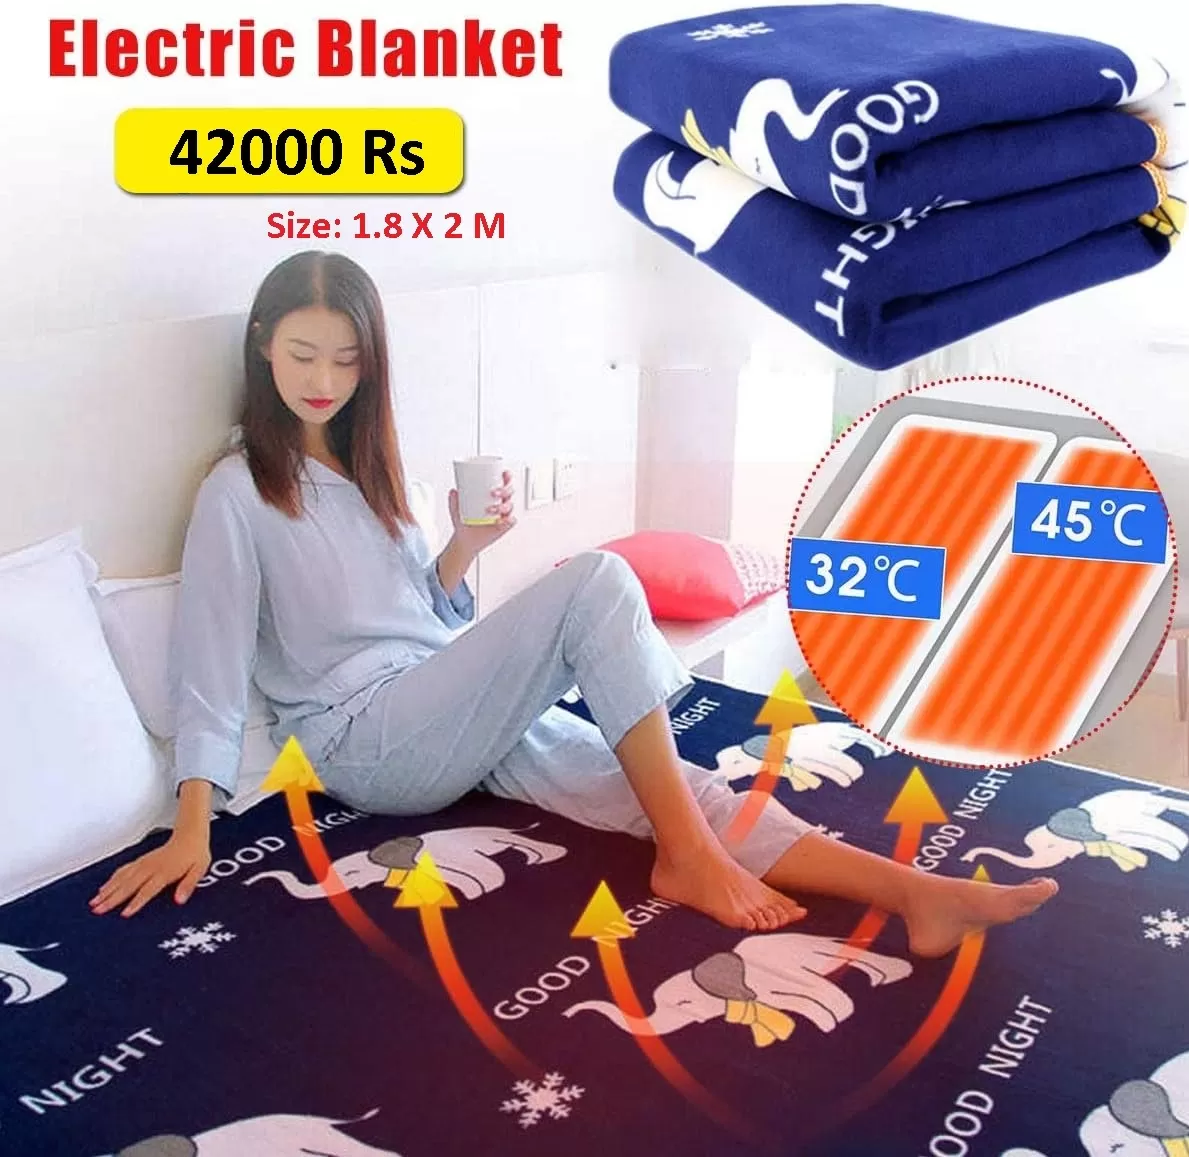 Themal Electric Blanket Heating Pad Bed Sheet for Winter